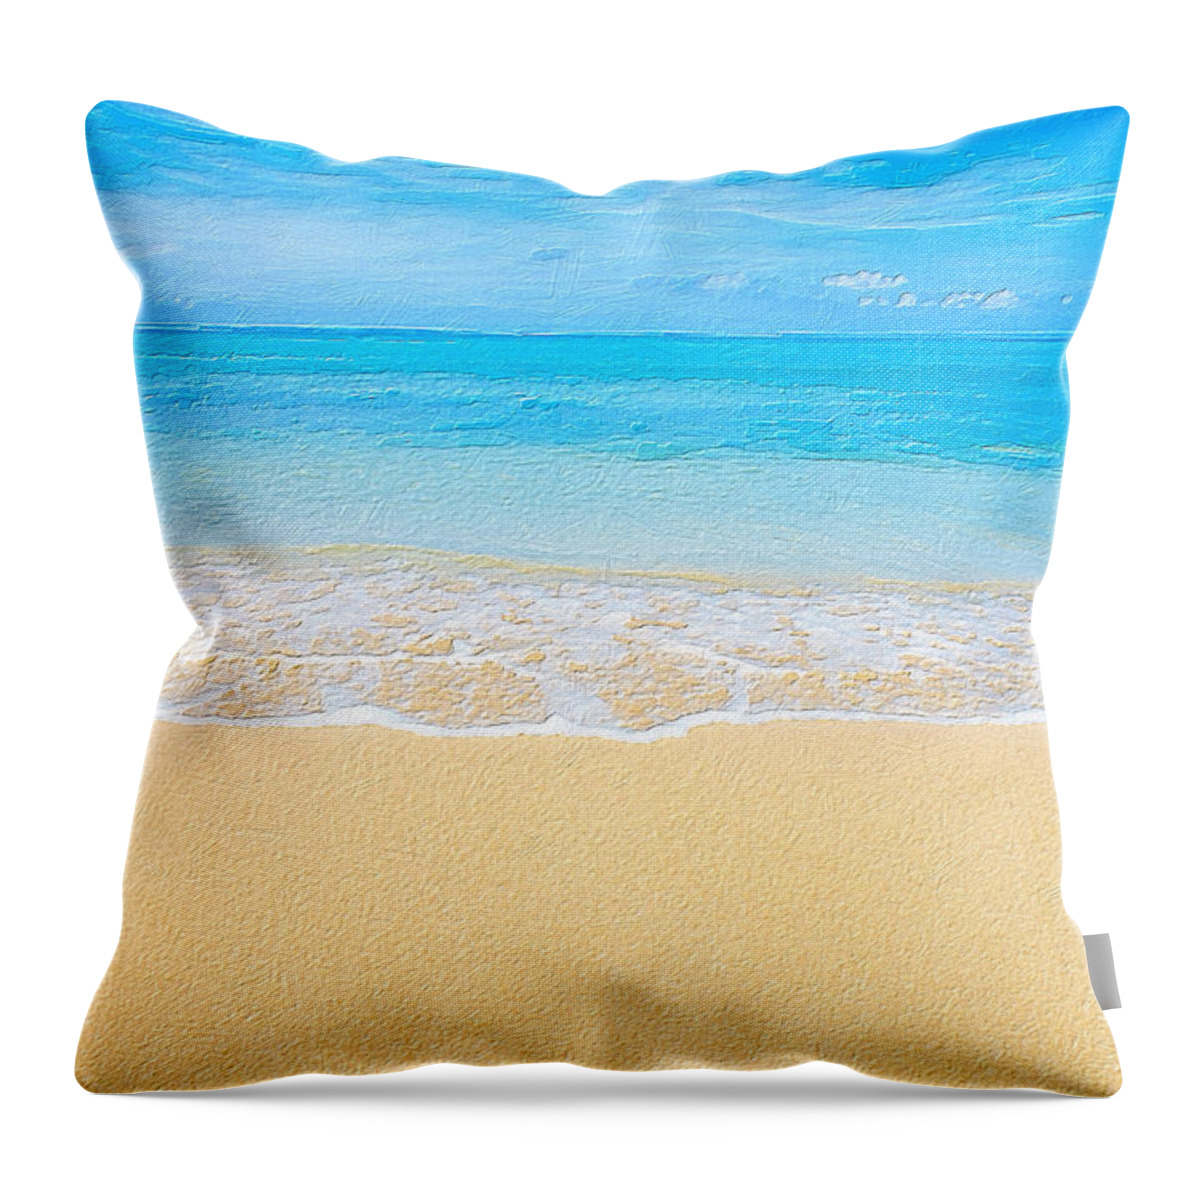 Wave Throw Pillow featuring the painting Beach Wave Ocean Sea Landscape Sky by Tony Rubino